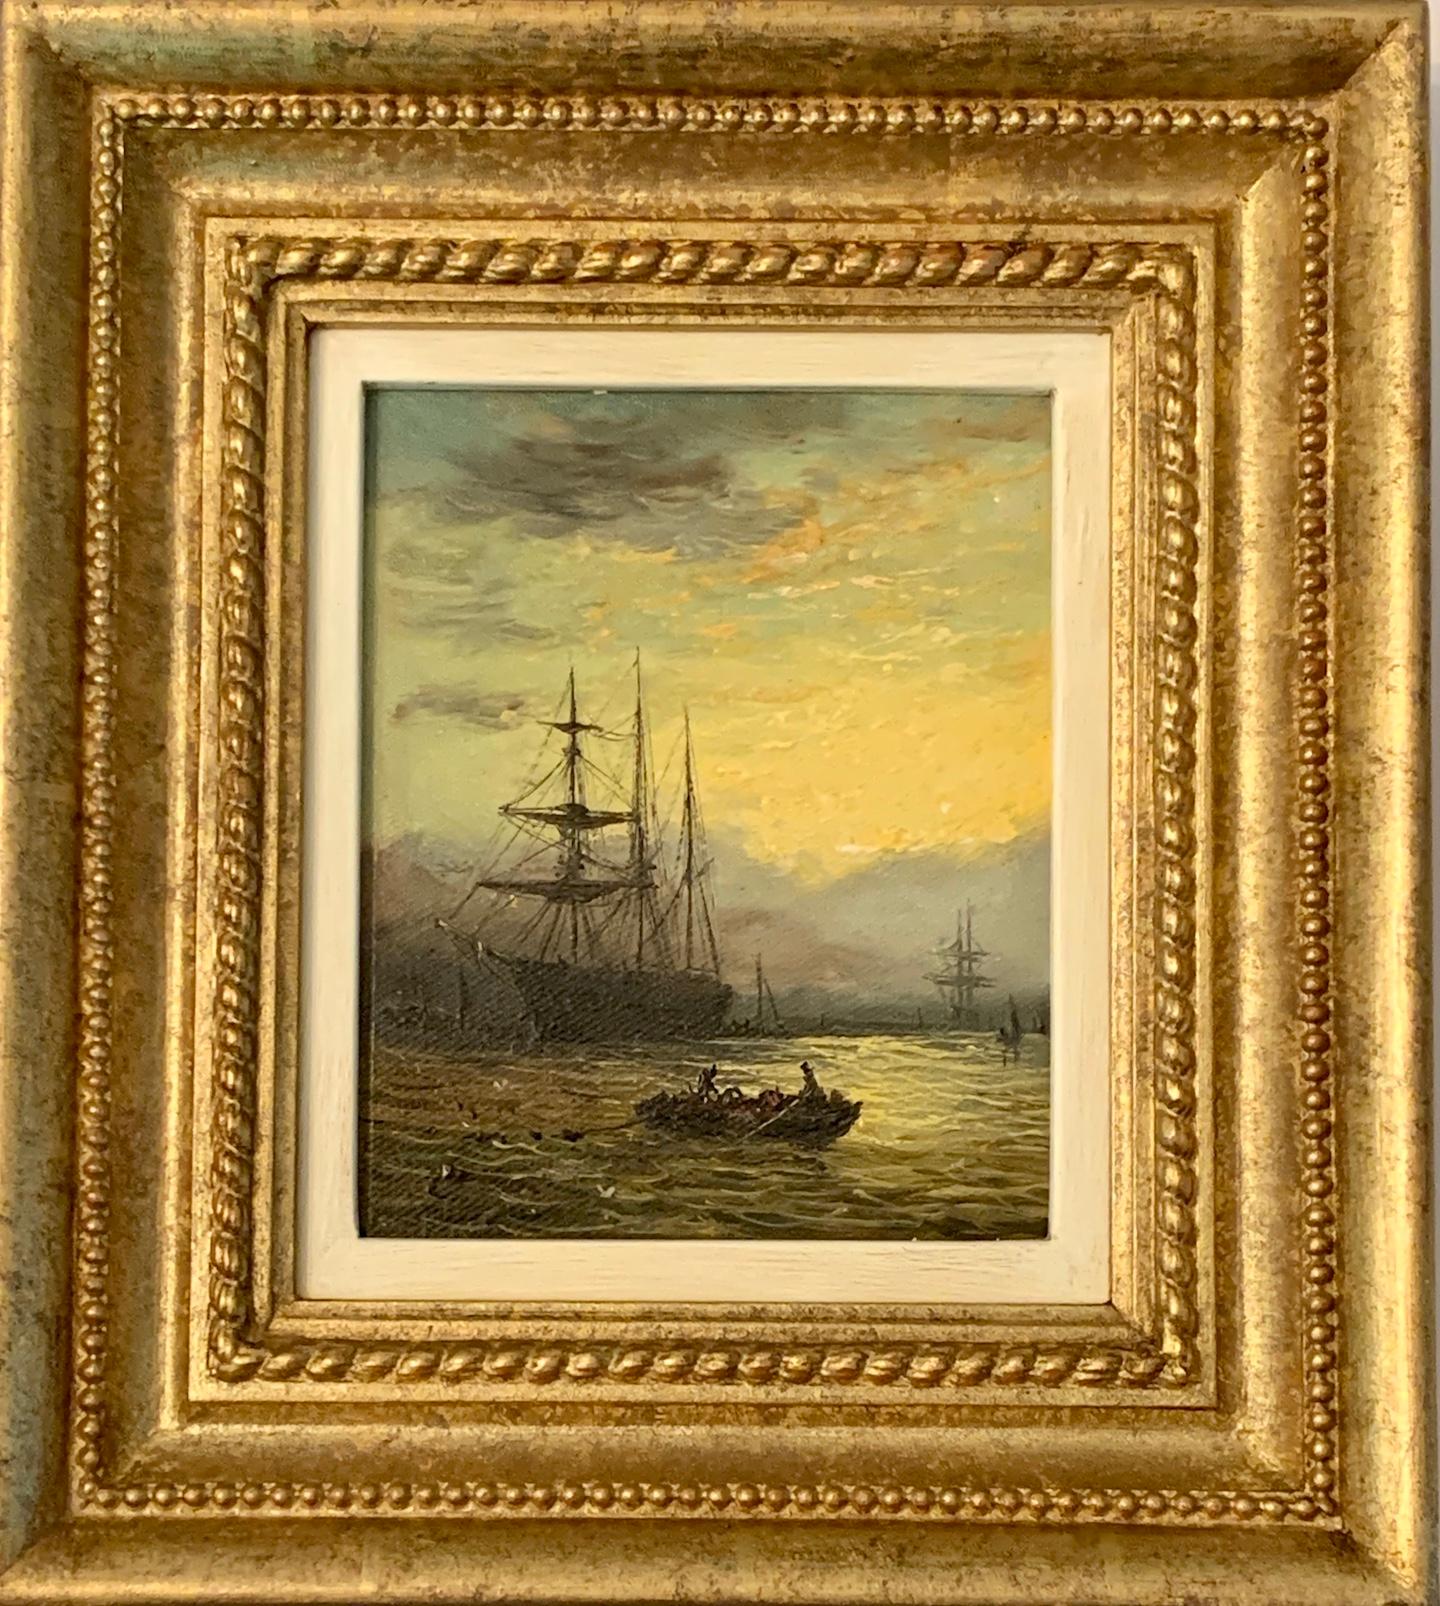 Adolphus Knell Landscape Painting - Antique Victorian, Impressionist 19th century English oil, Fishings boat at Sea